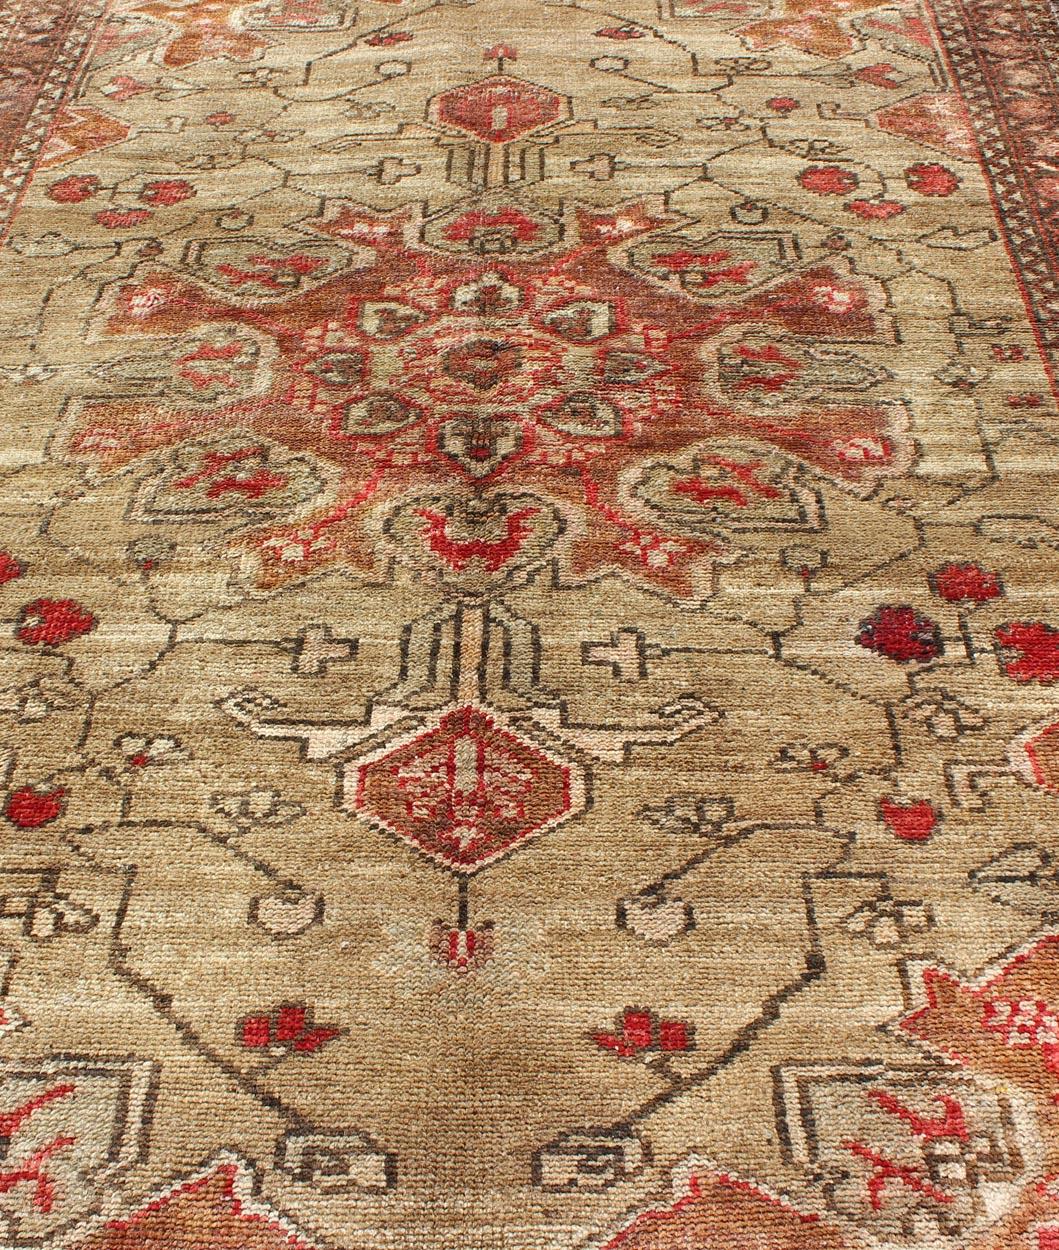 Wool Vintage Persian Rug with Tribal Design in Beautiful Green and Coral Colors